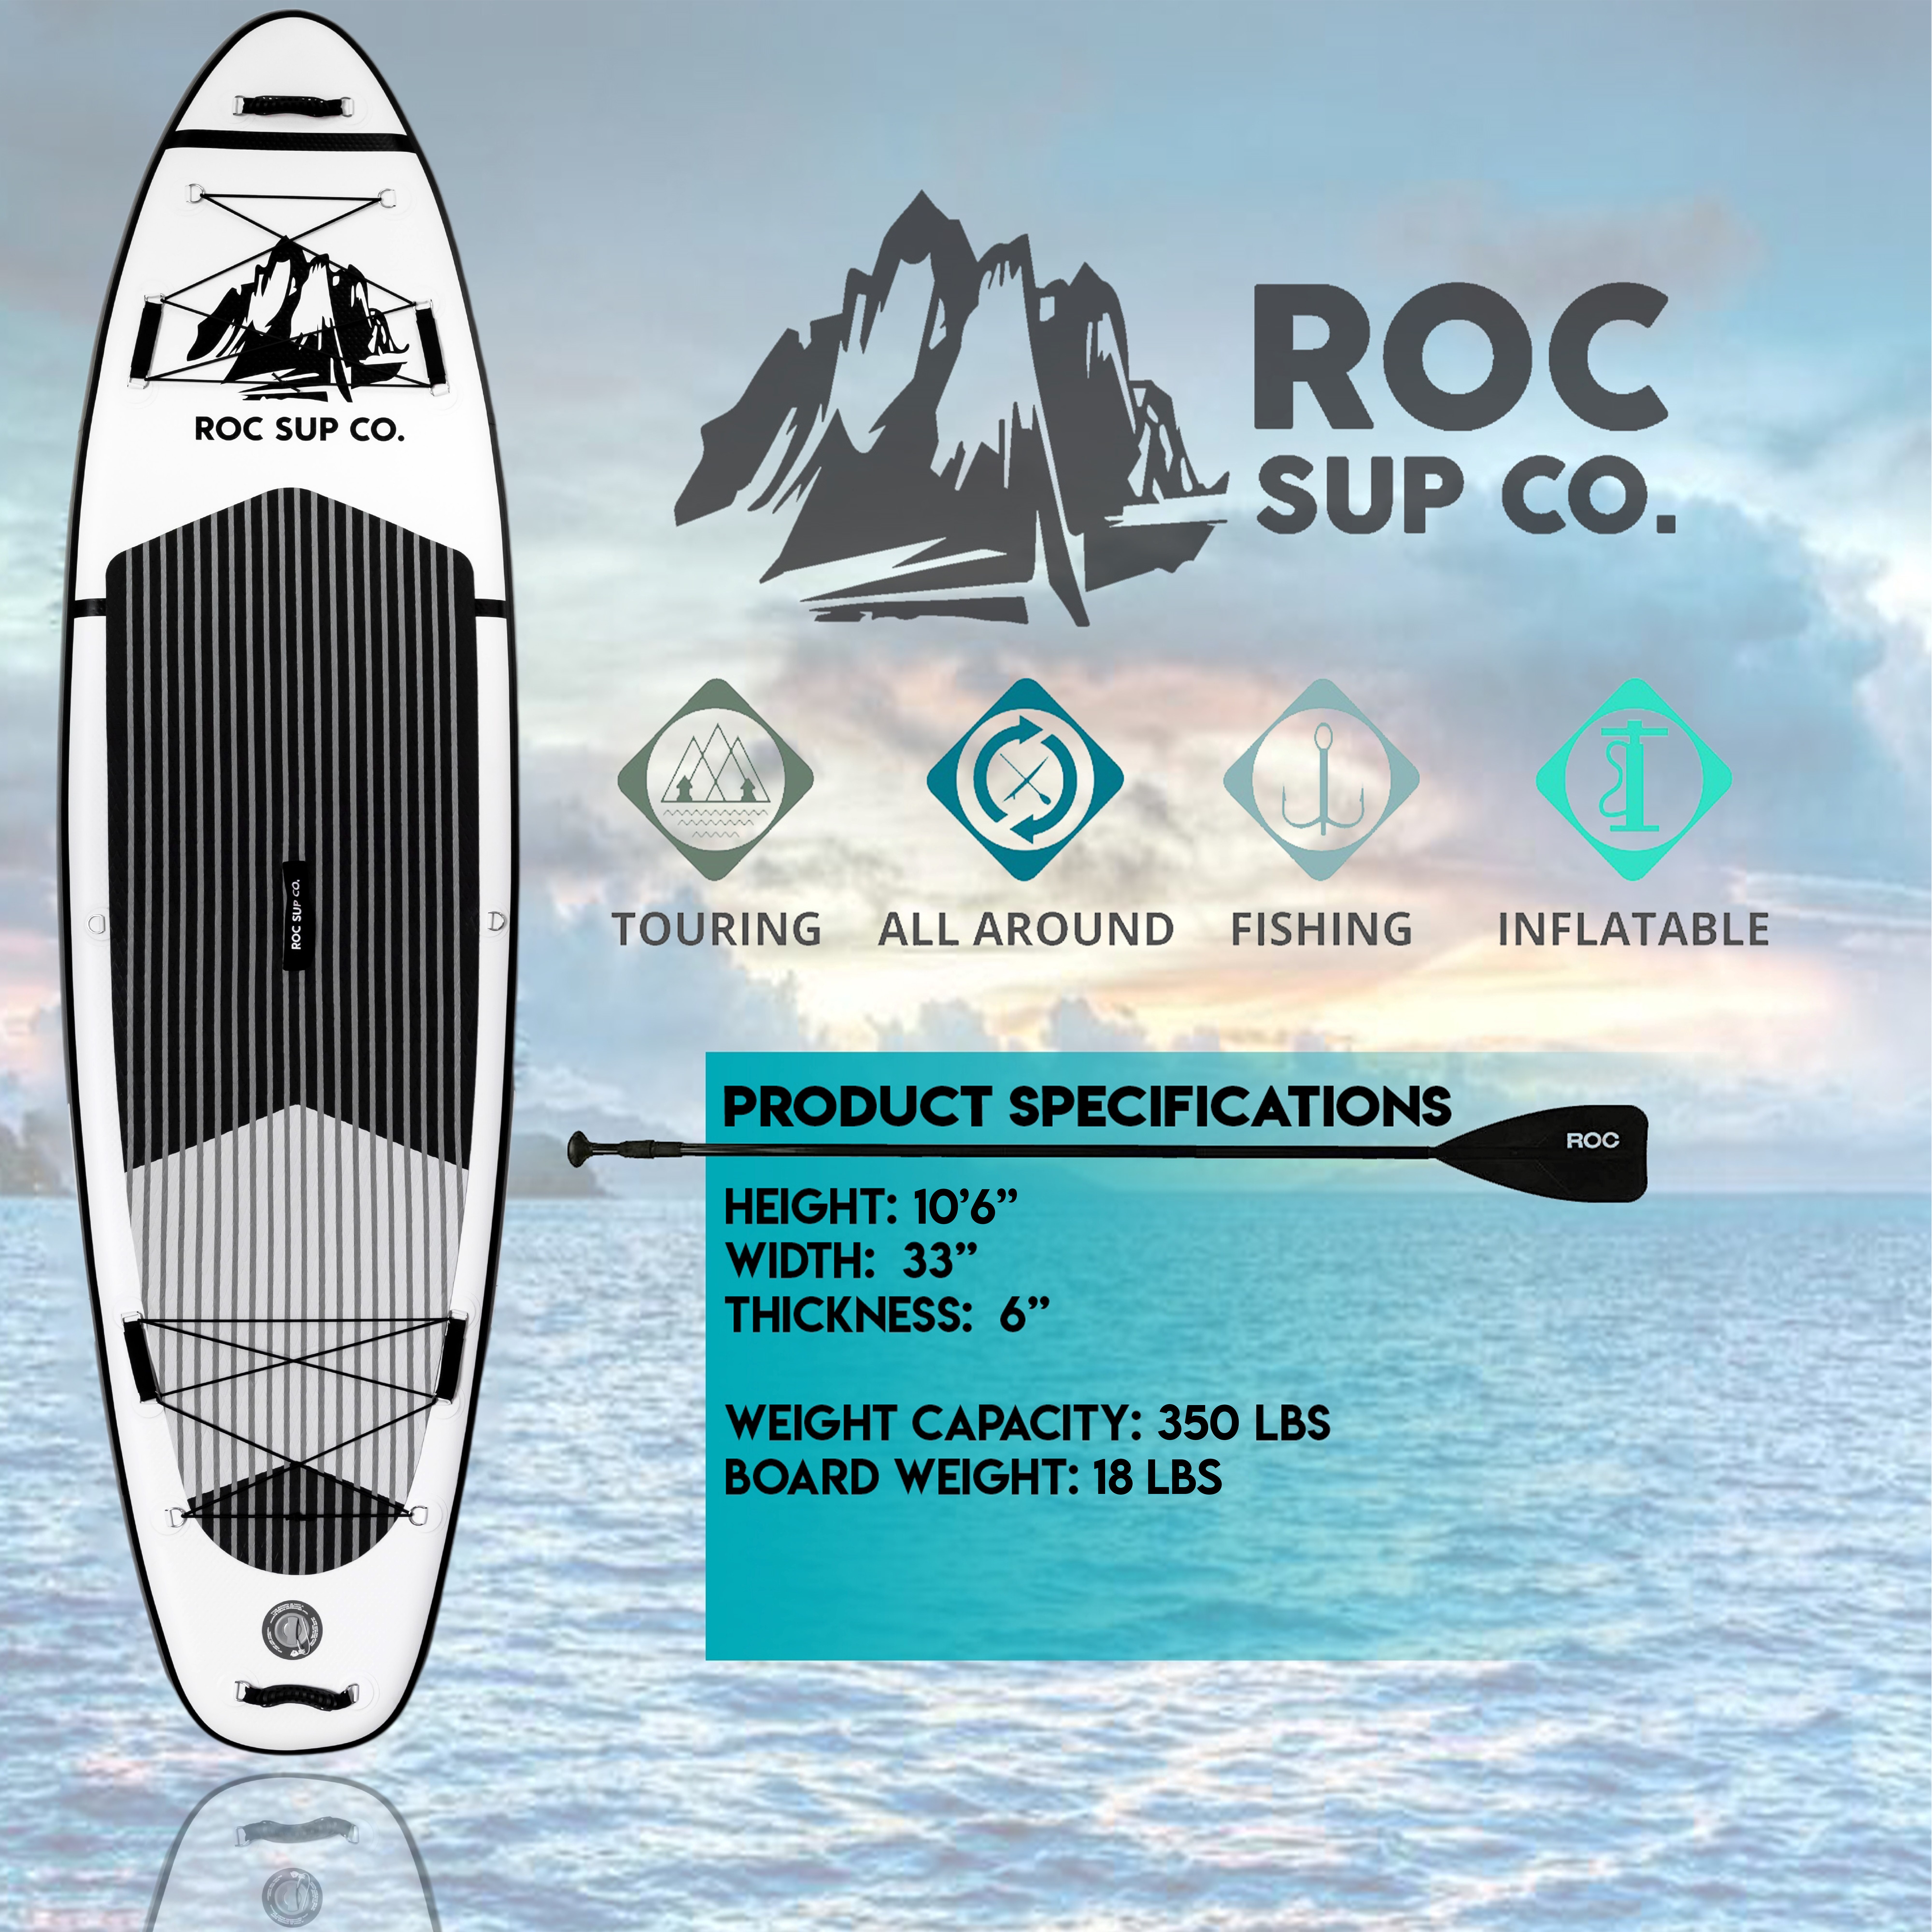 Roc Inflatable Stand Up Paddle Board with Premium sup Accessories & Backpack, Non-Slip Deck, Waterproof Bag, Leash, Paddle and Hand Pump - image 5 of 5